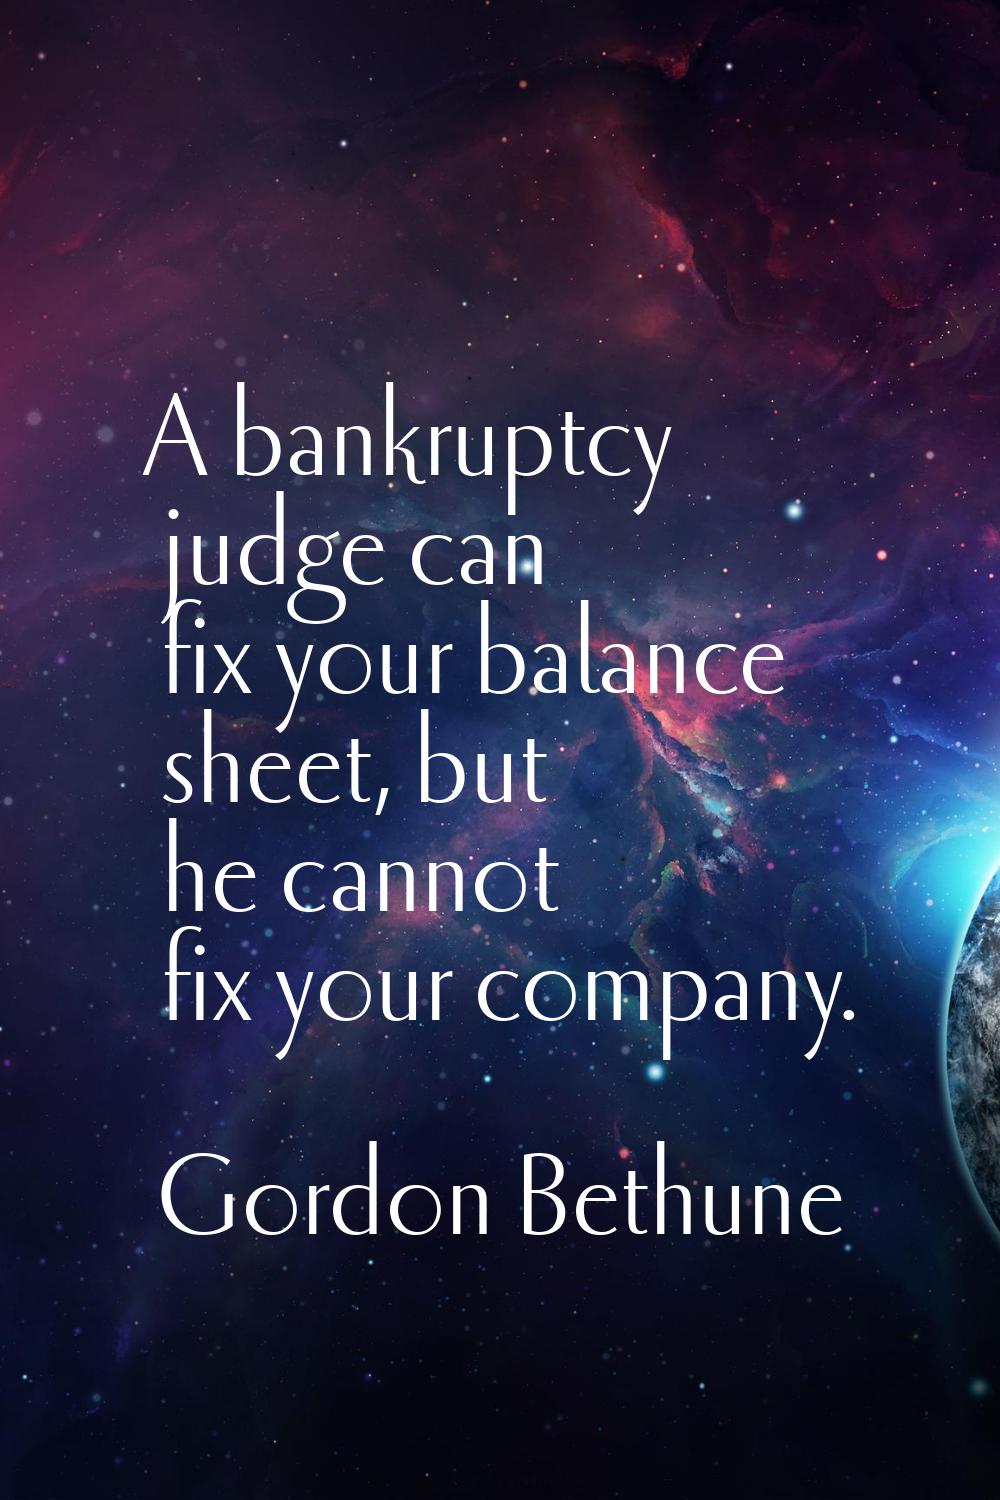 A bankruptcy judge can fix your balance sheet, but he cannot fix your company.